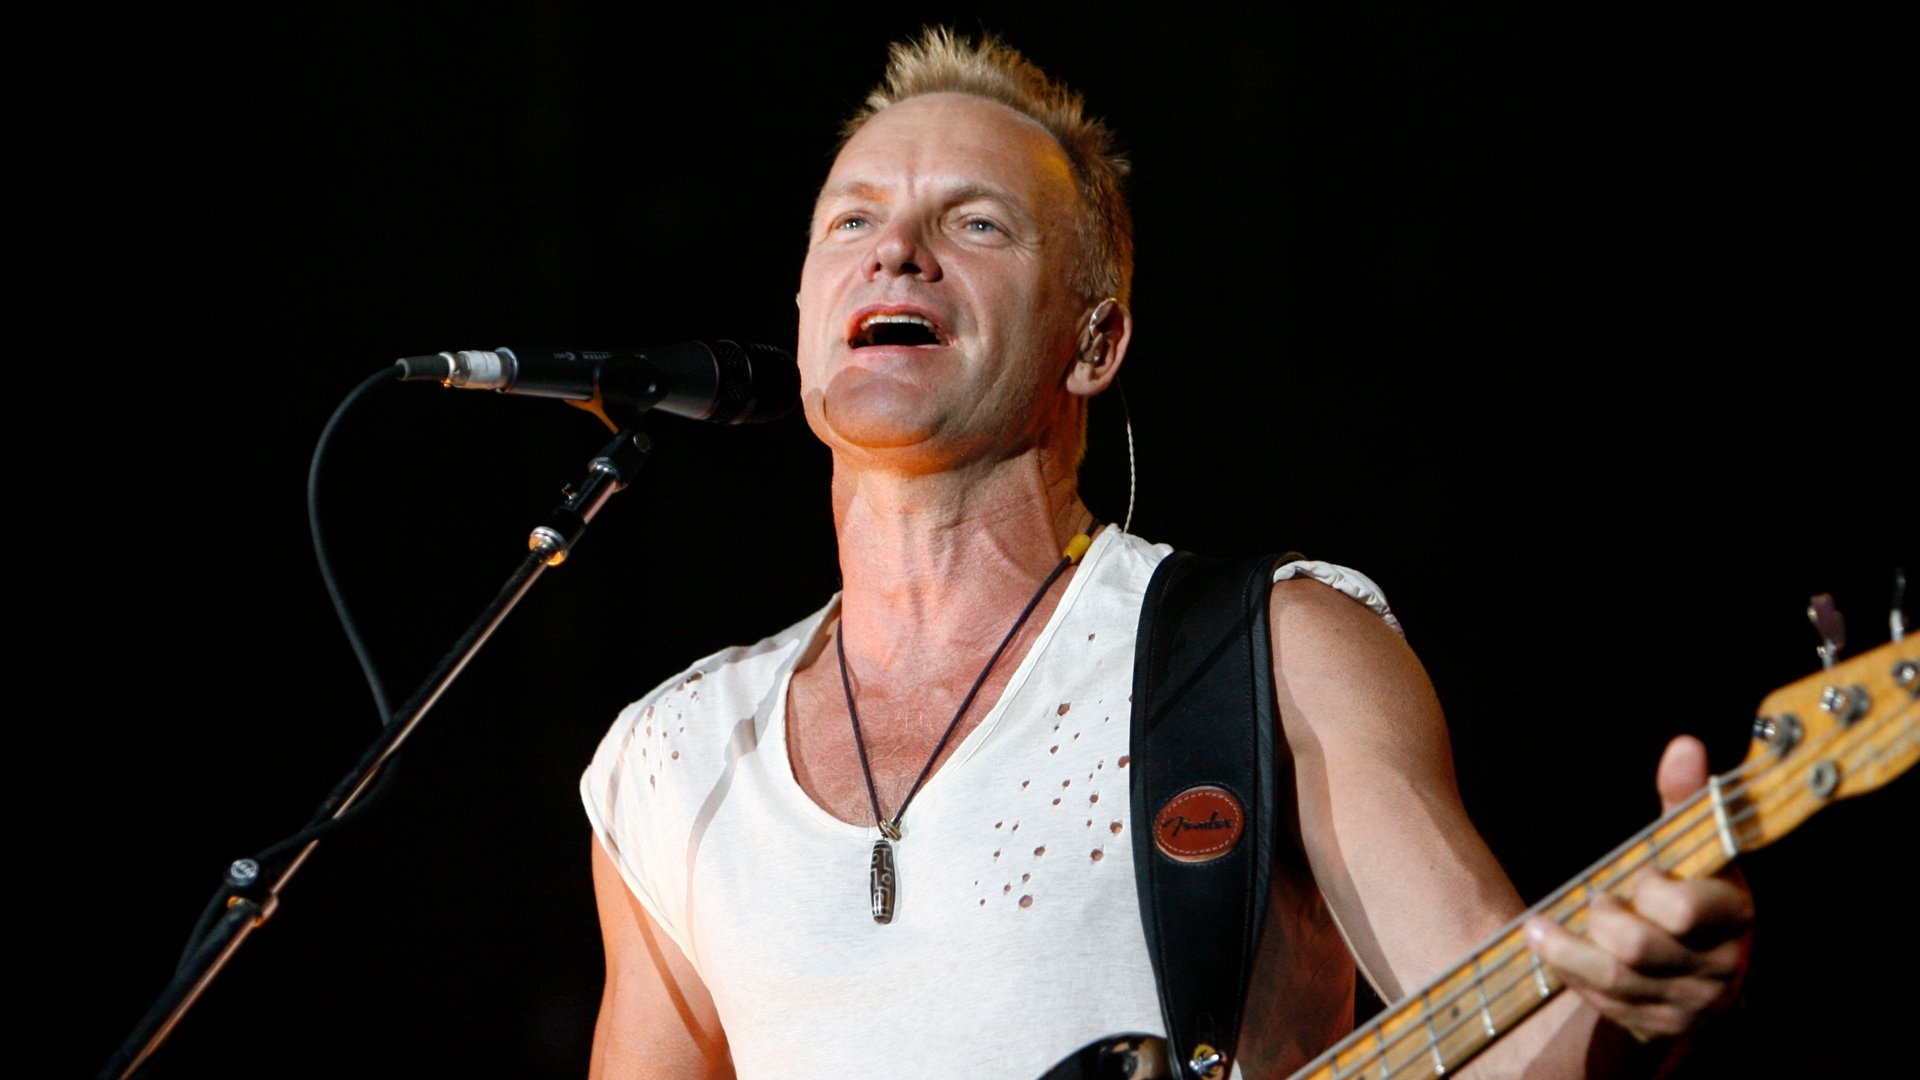 Sting, Musician wallpapers, Wide selection, 1920x1080 Full HD Desktop